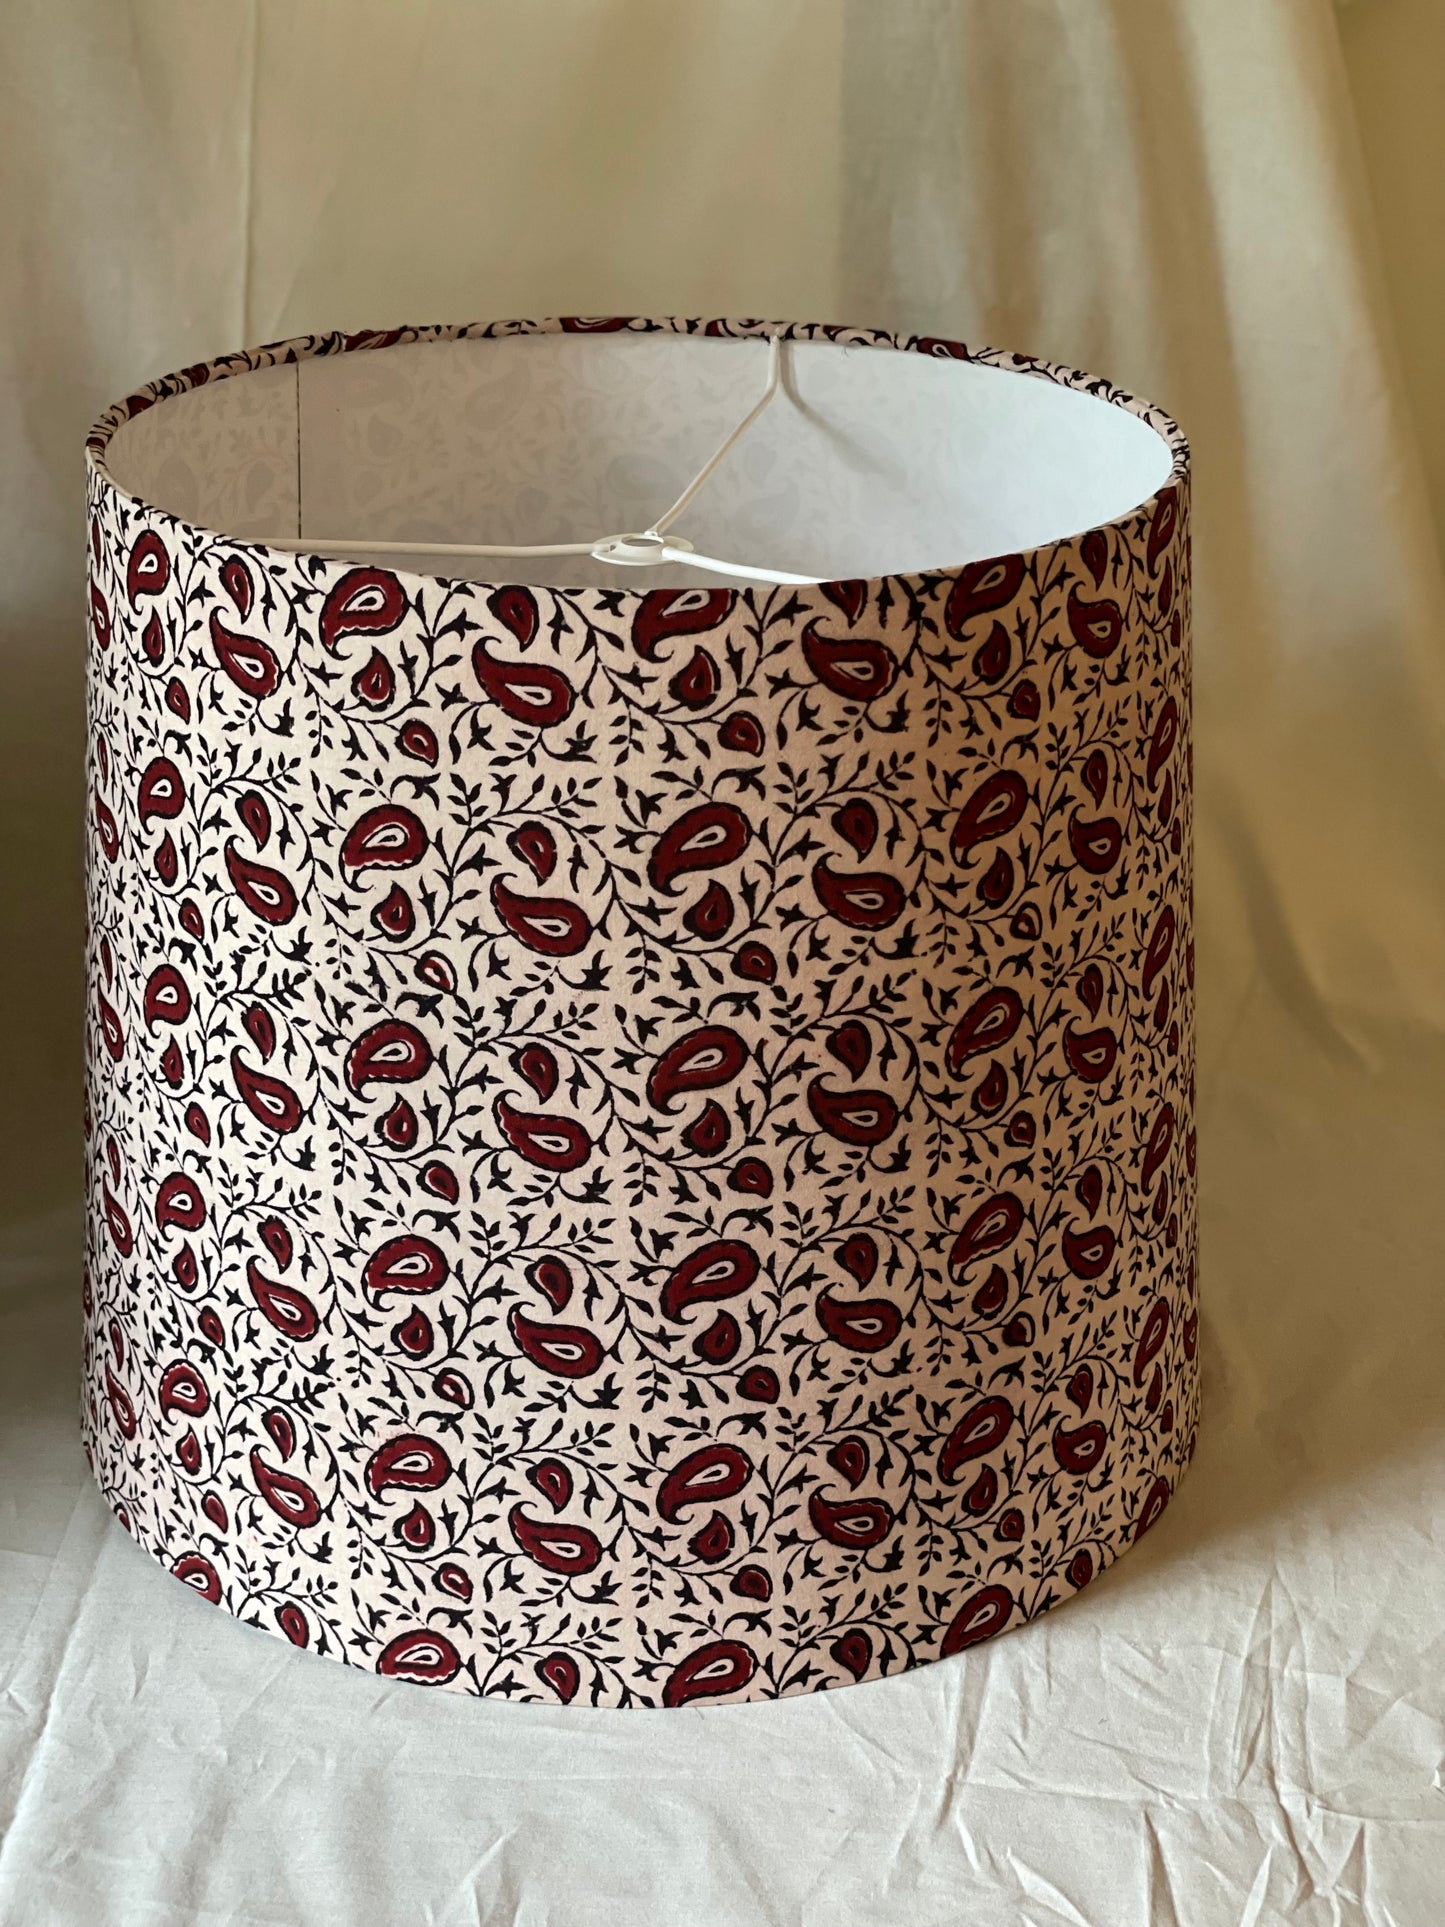 Large Empire Shade. 11.75 x 13.75 x 11.75. Indian Block Print from Bagh. Maroon and Licorice Paisley Pattern on Ivory.